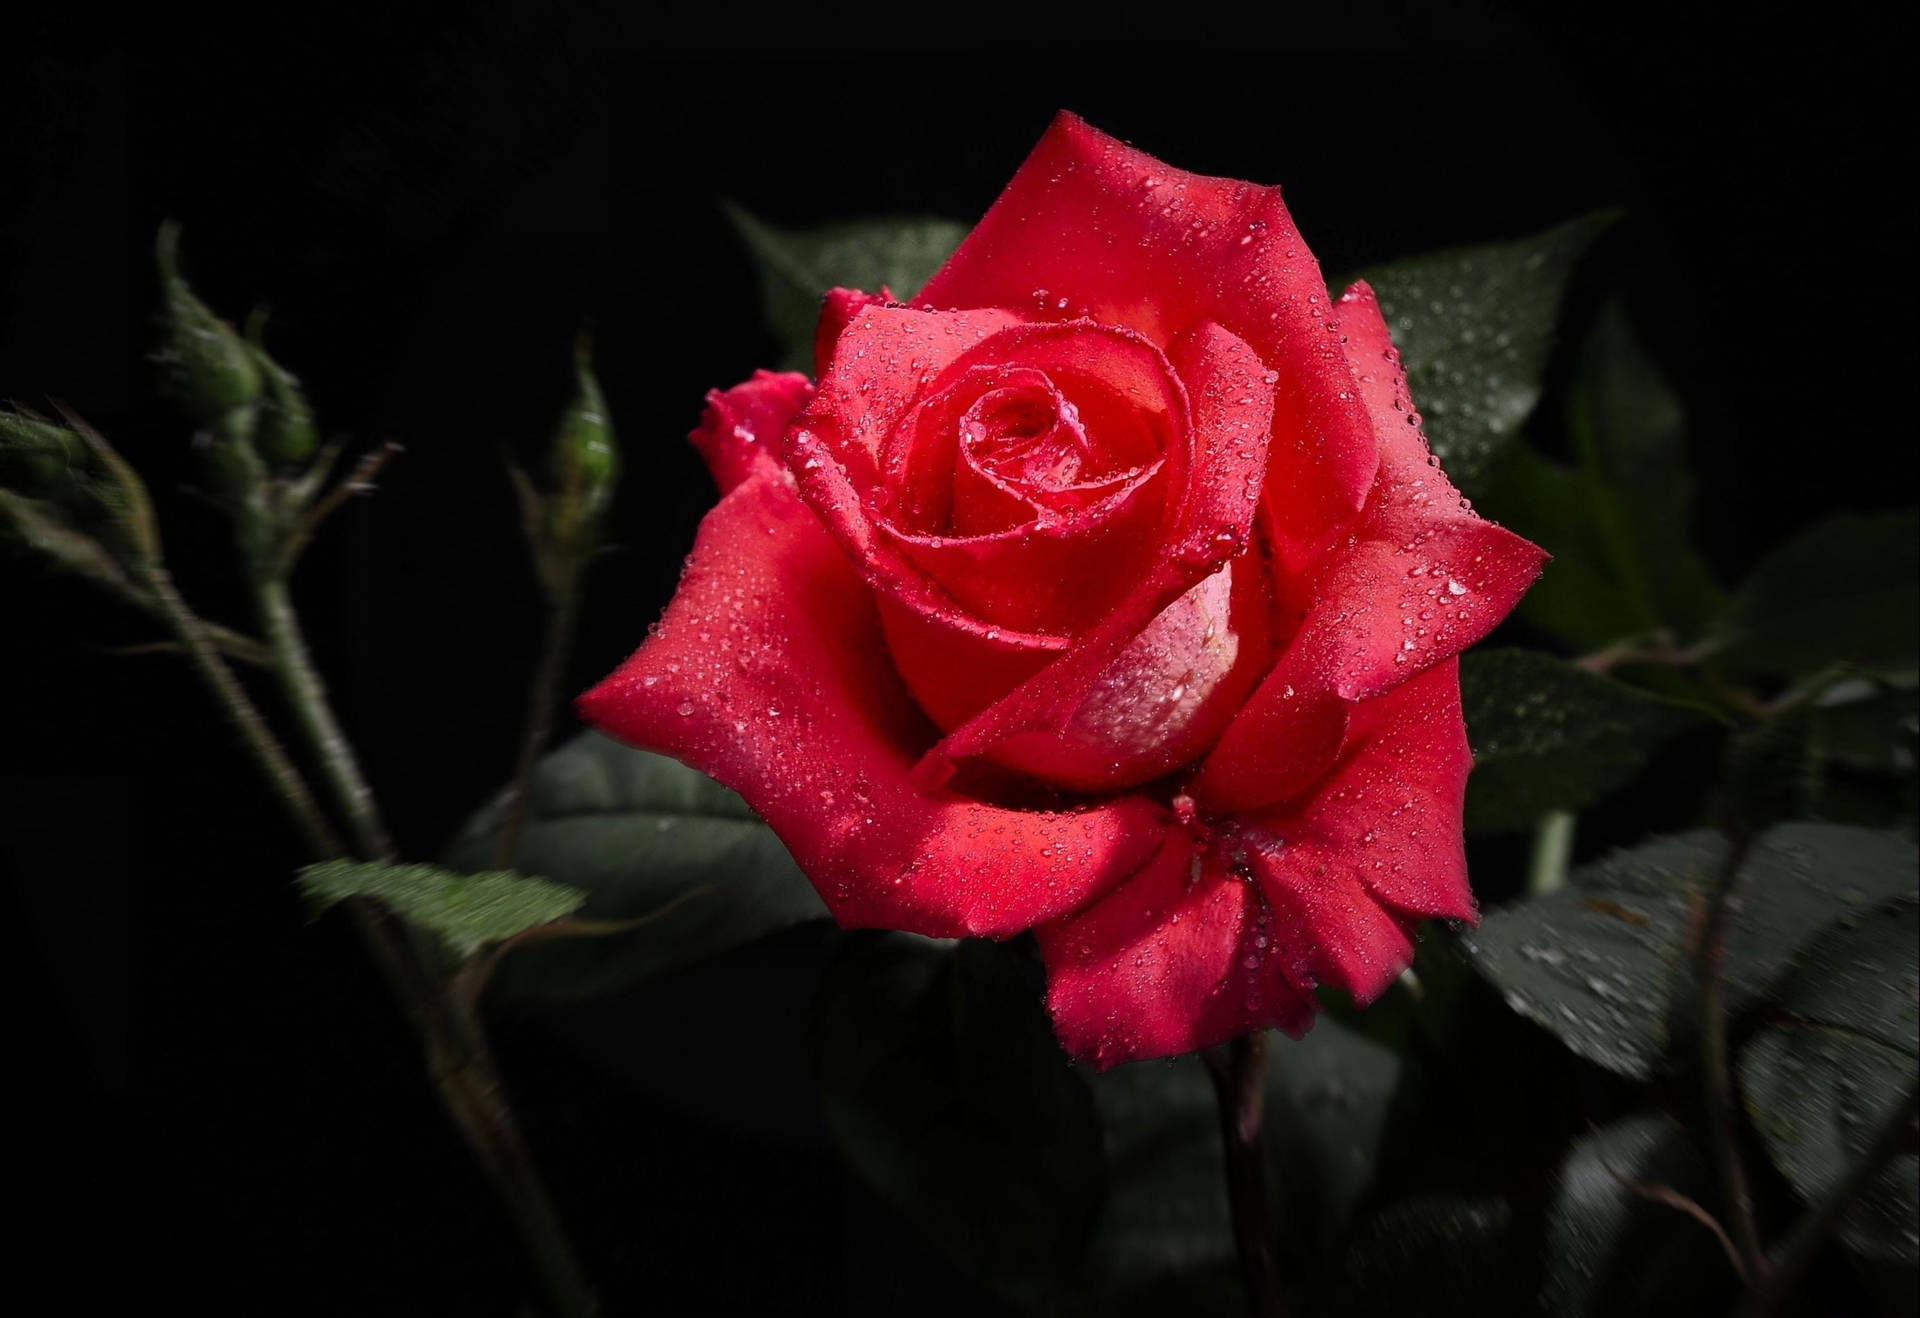 Download Background Black With A Red Rose Wallpaper 